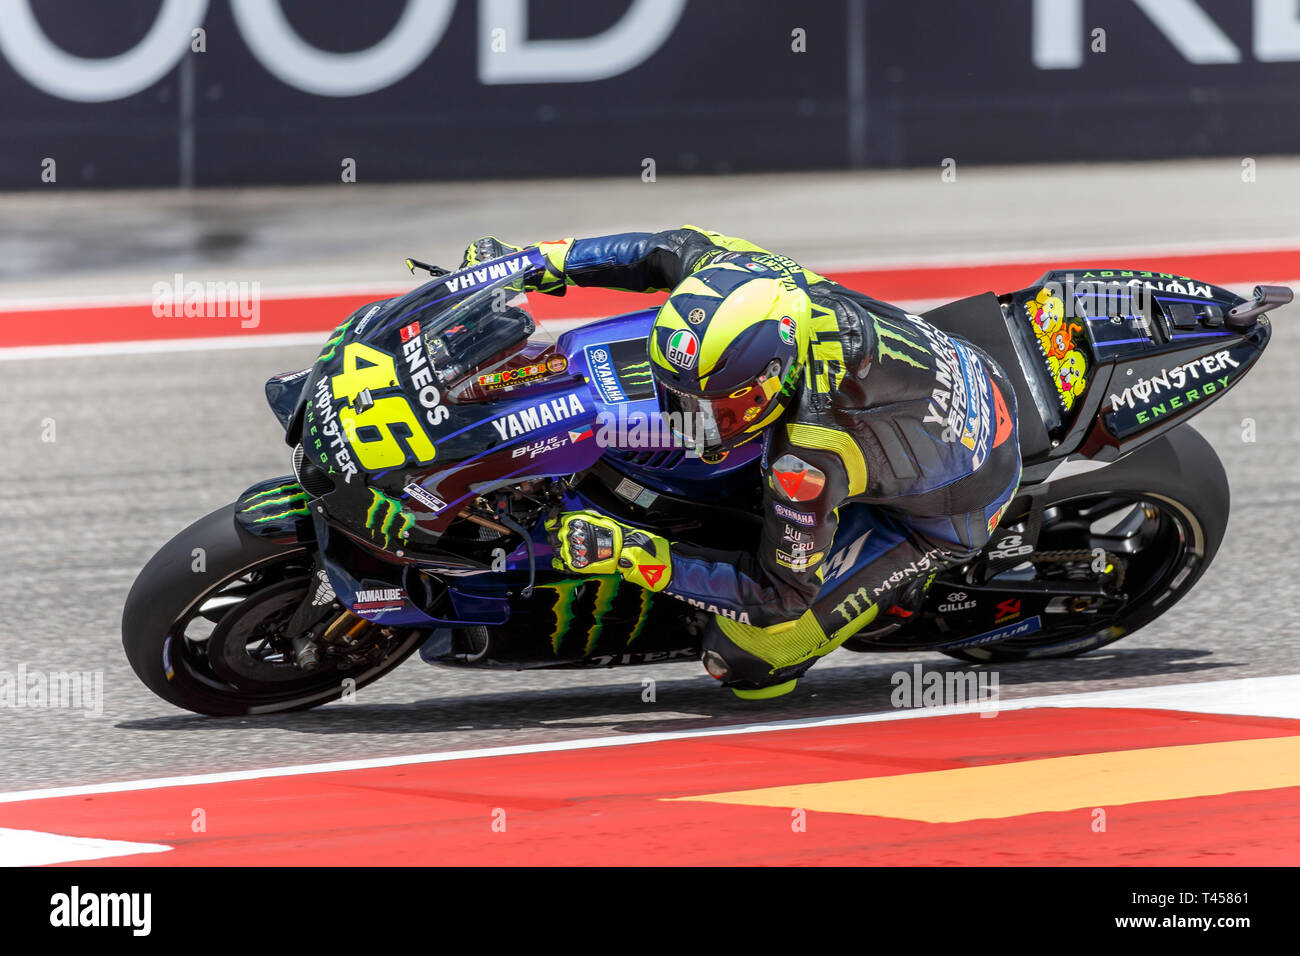 April 13, 2019: Valentino Rossi #46 with Monster Energy Yamaha MotoGP Team  - Yamaha YZR-M1 in action MotoGP Free Practice 3 at the Red Bull Grand Prix  of the Americas. Austin, Texas.